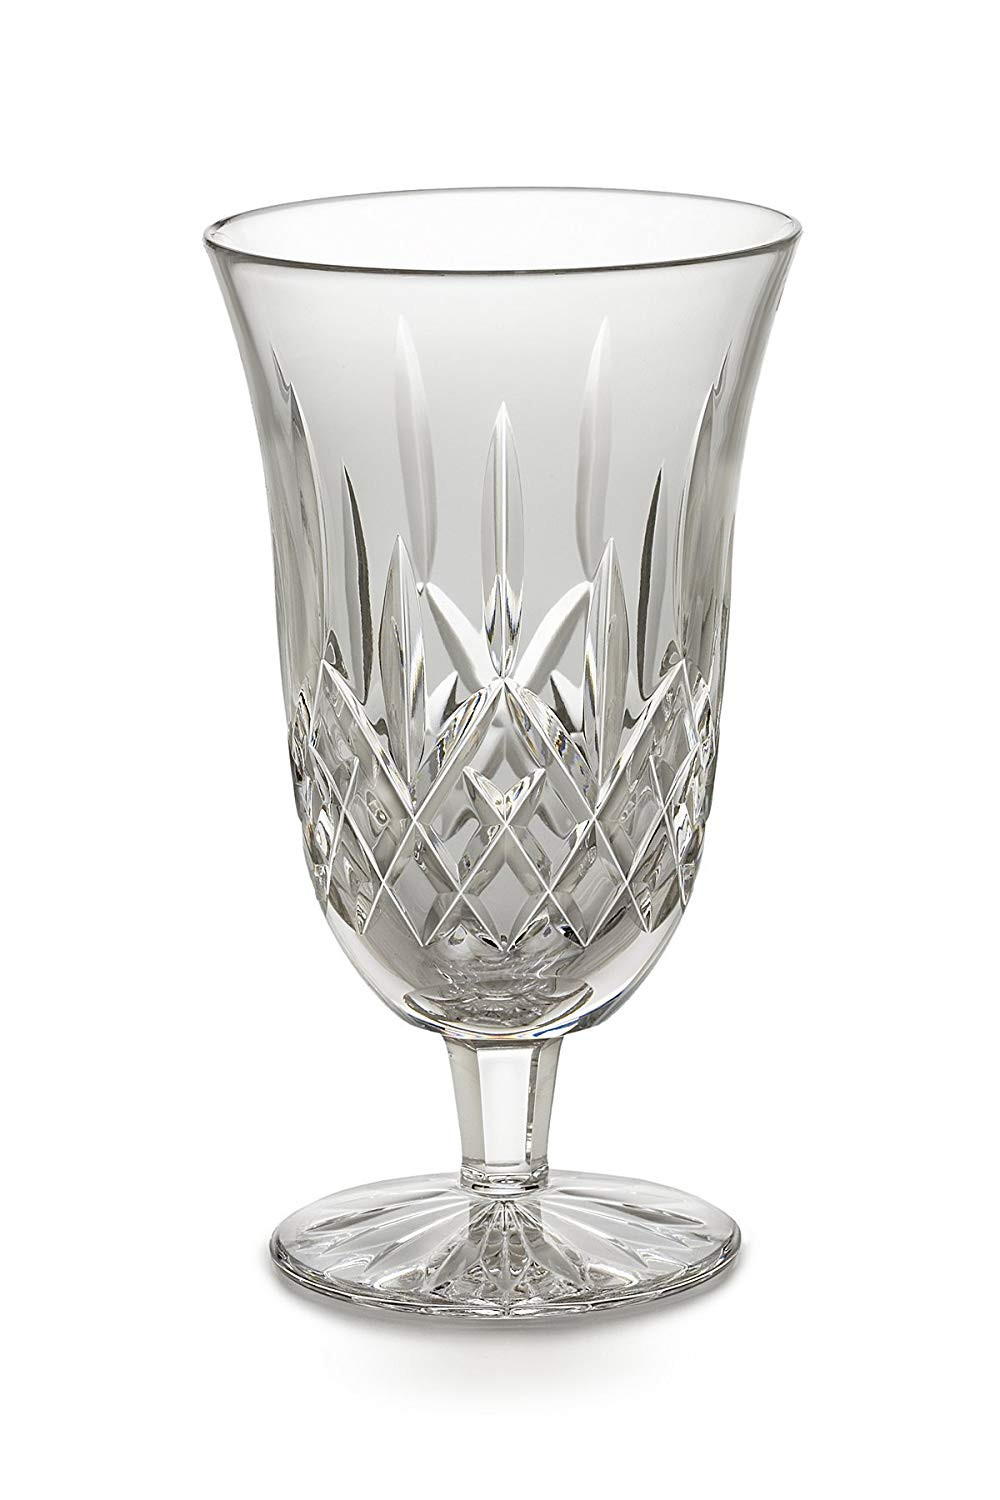 28 Unique Waterford Lismore Vase 10 Inch 2024 free download waterford lismore vase 10 inch of amazon com waterford lismore iced beverage 12 ounce waterford pertaining to amazon com waterford lismore iced beverage 12 ounce waterford crystal lismore ic